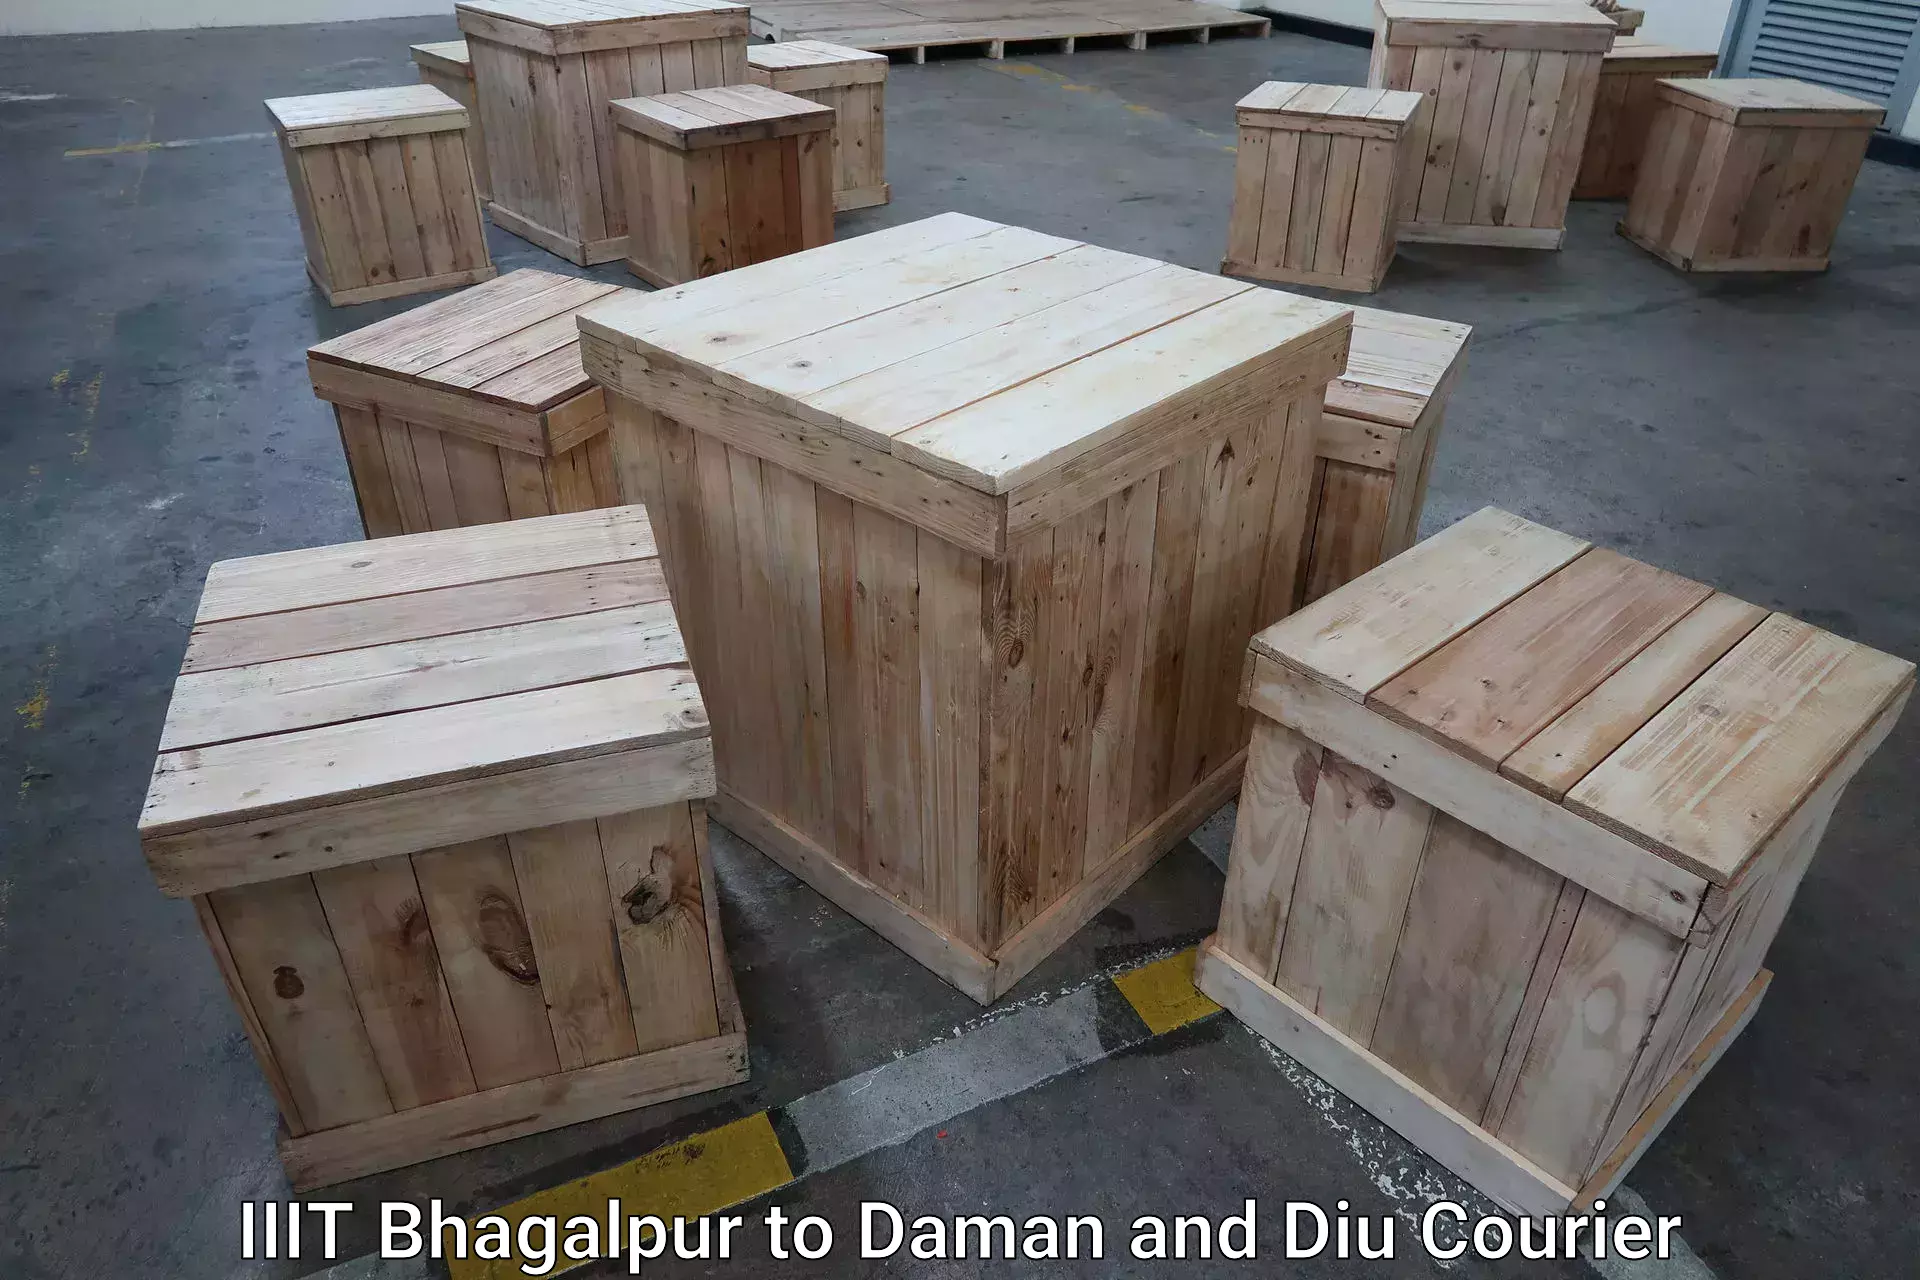 Luggage delivery system IIIT Bhagalpur to Daman and Diu